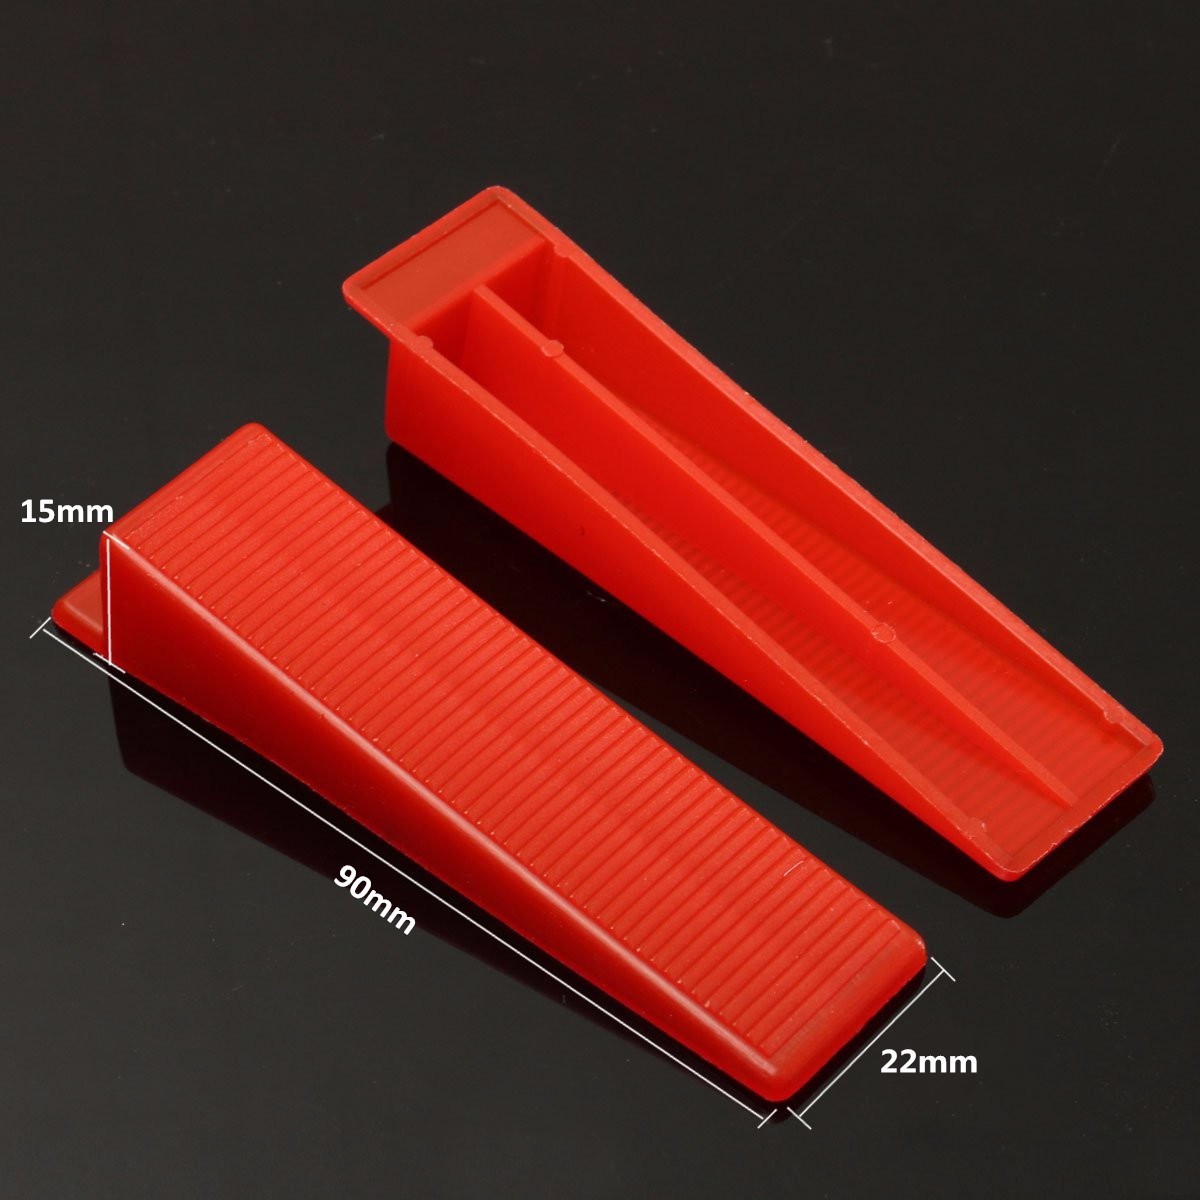 600-Tile-Leveling-System-Wedges-and-Clips-Spacer-Plastic-Tiling-Tools-1121739-3